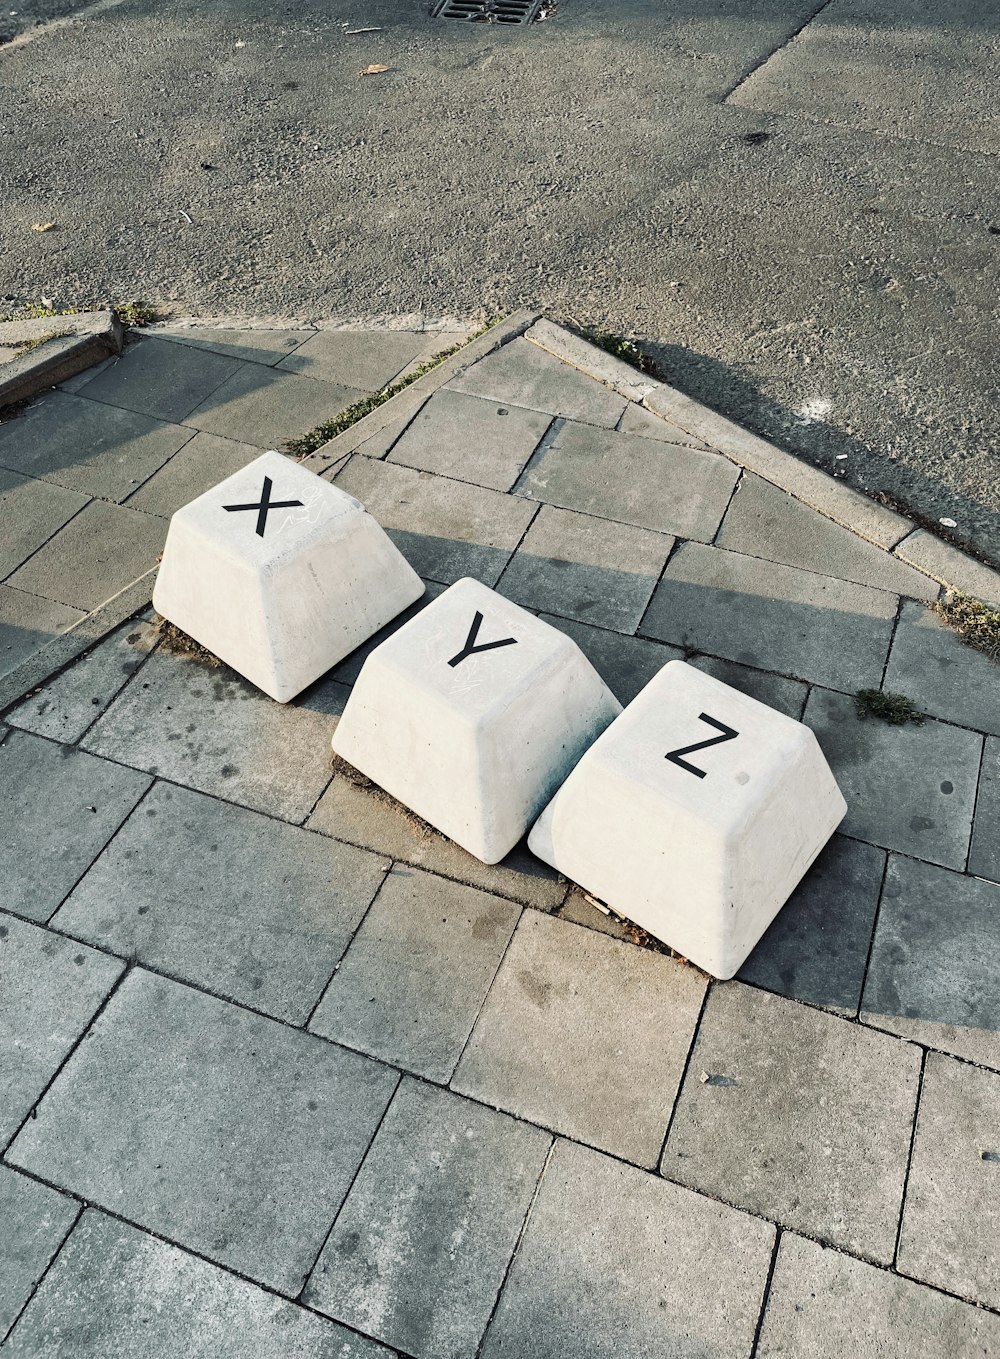 a number of blocks that have been placed on the ground